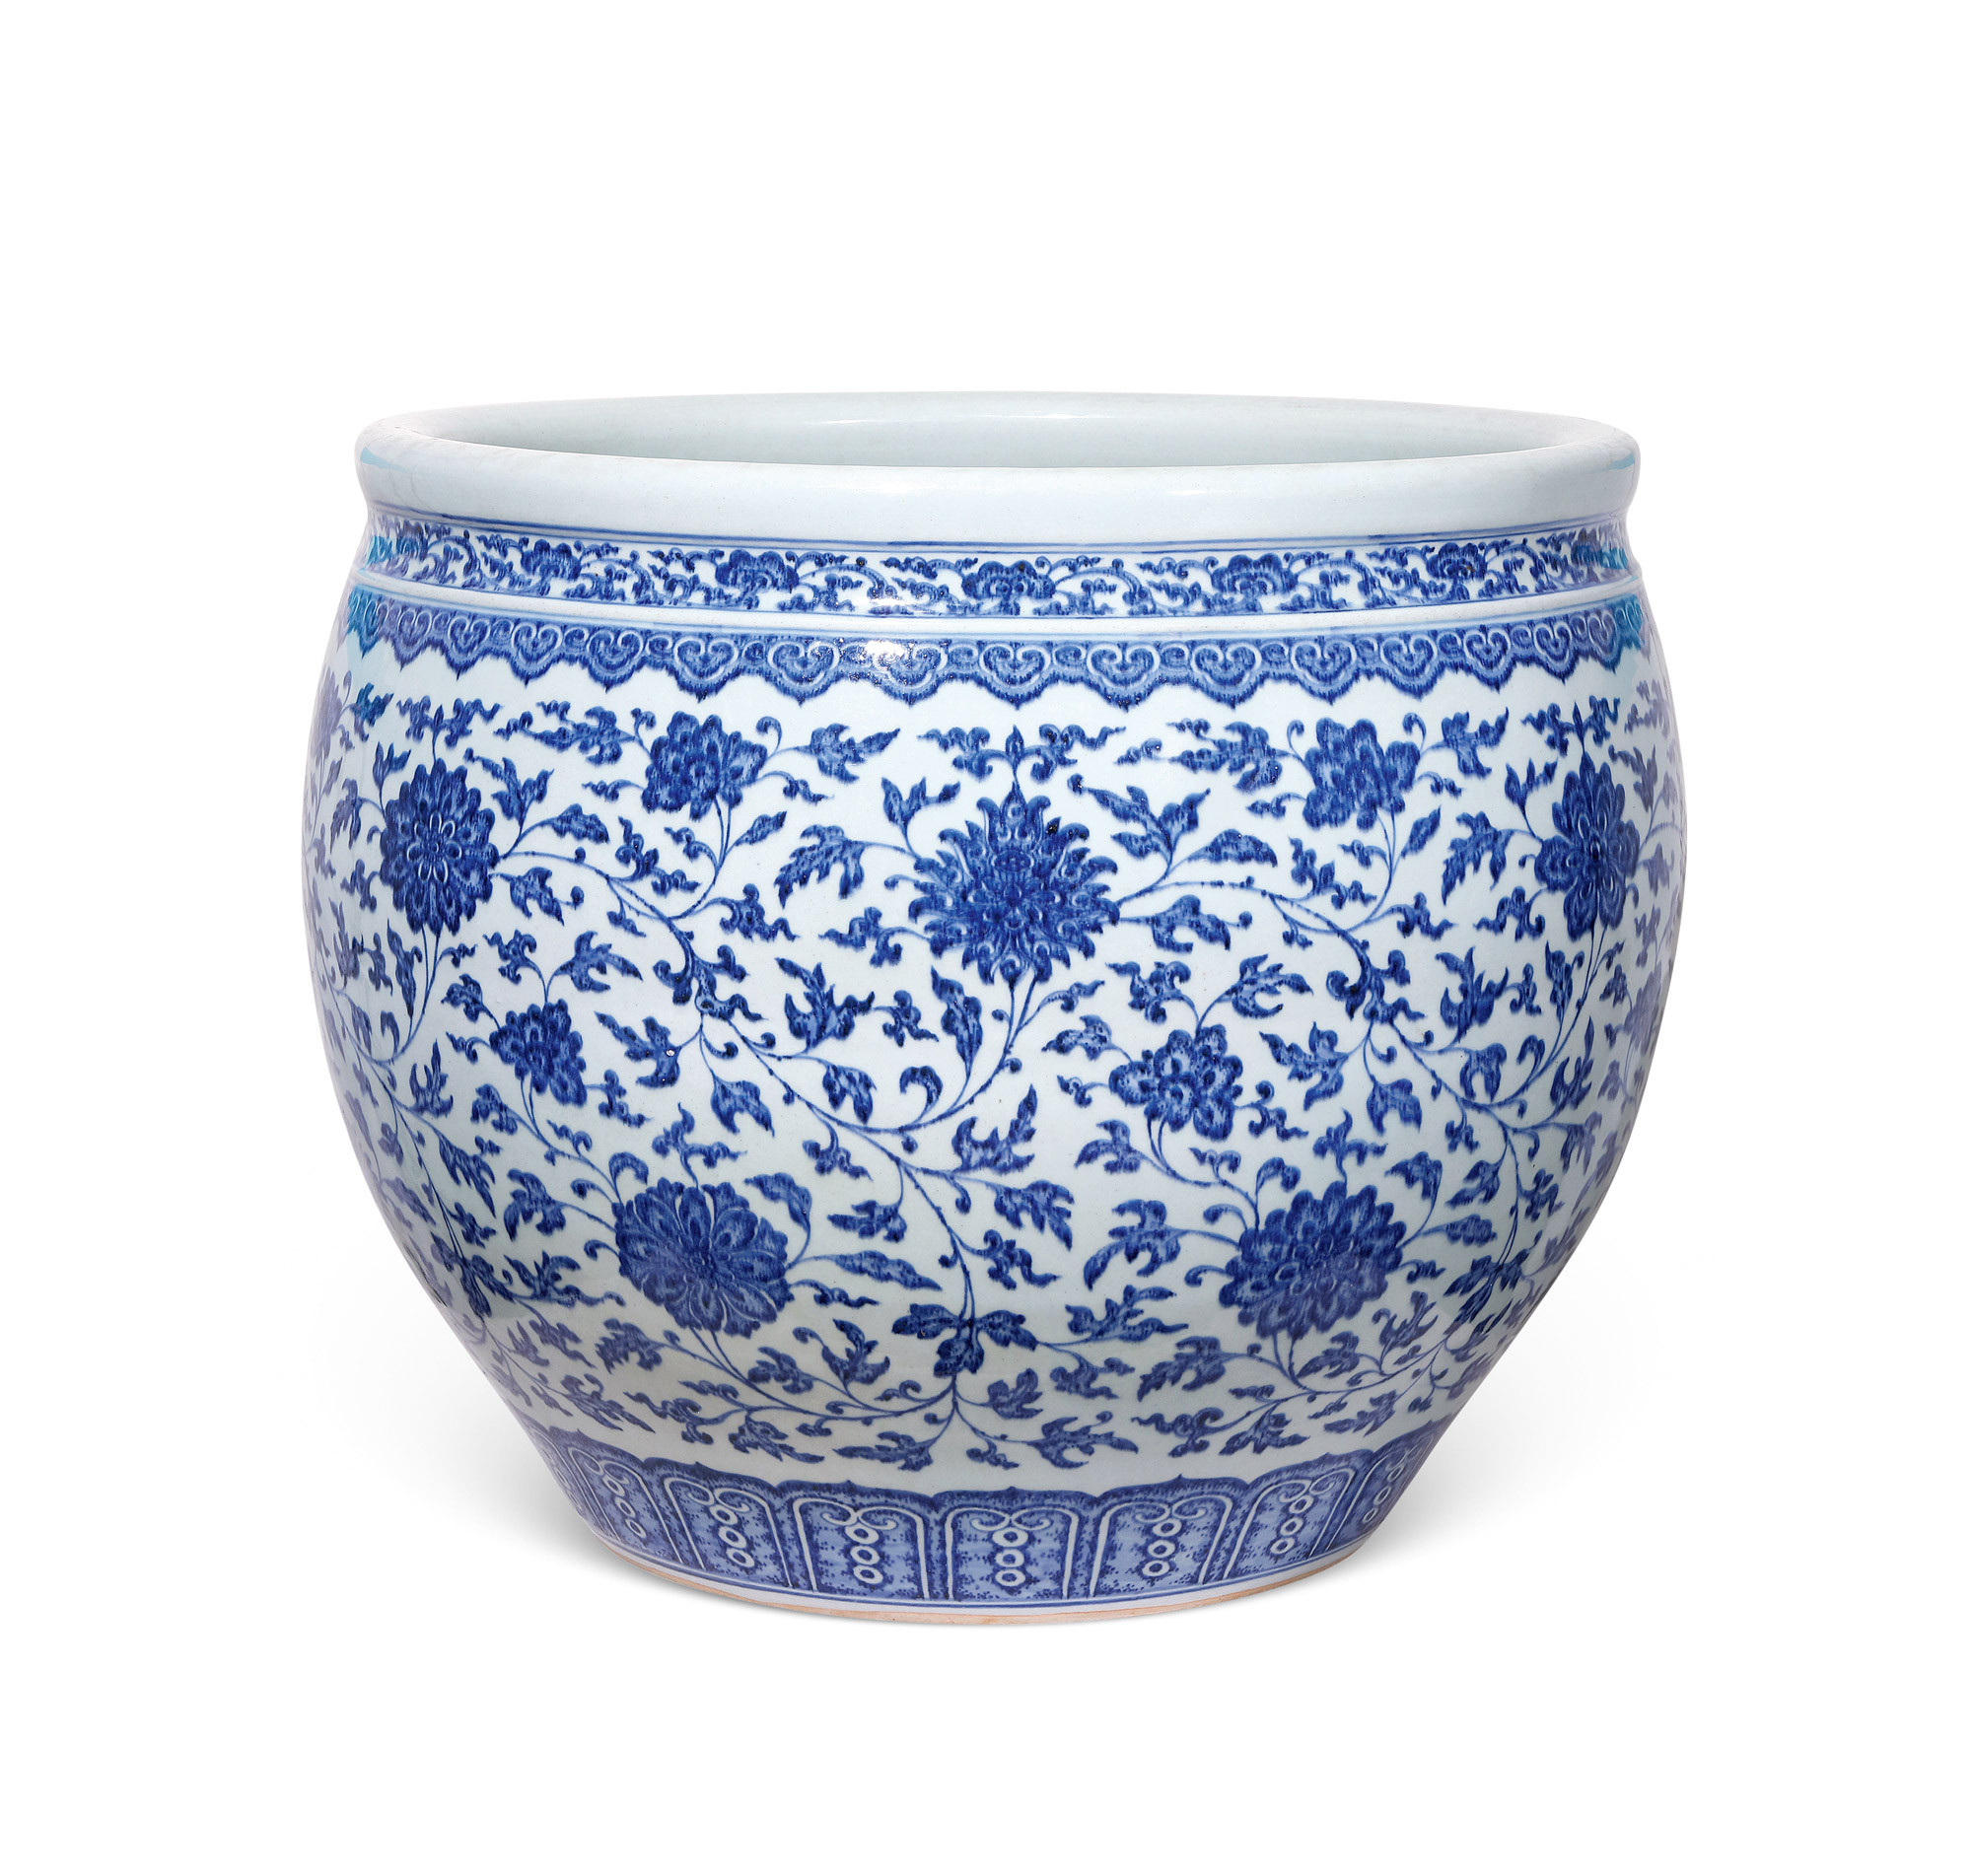 A BLUE AND WHITE URN WITH FLOWERS DESIGN